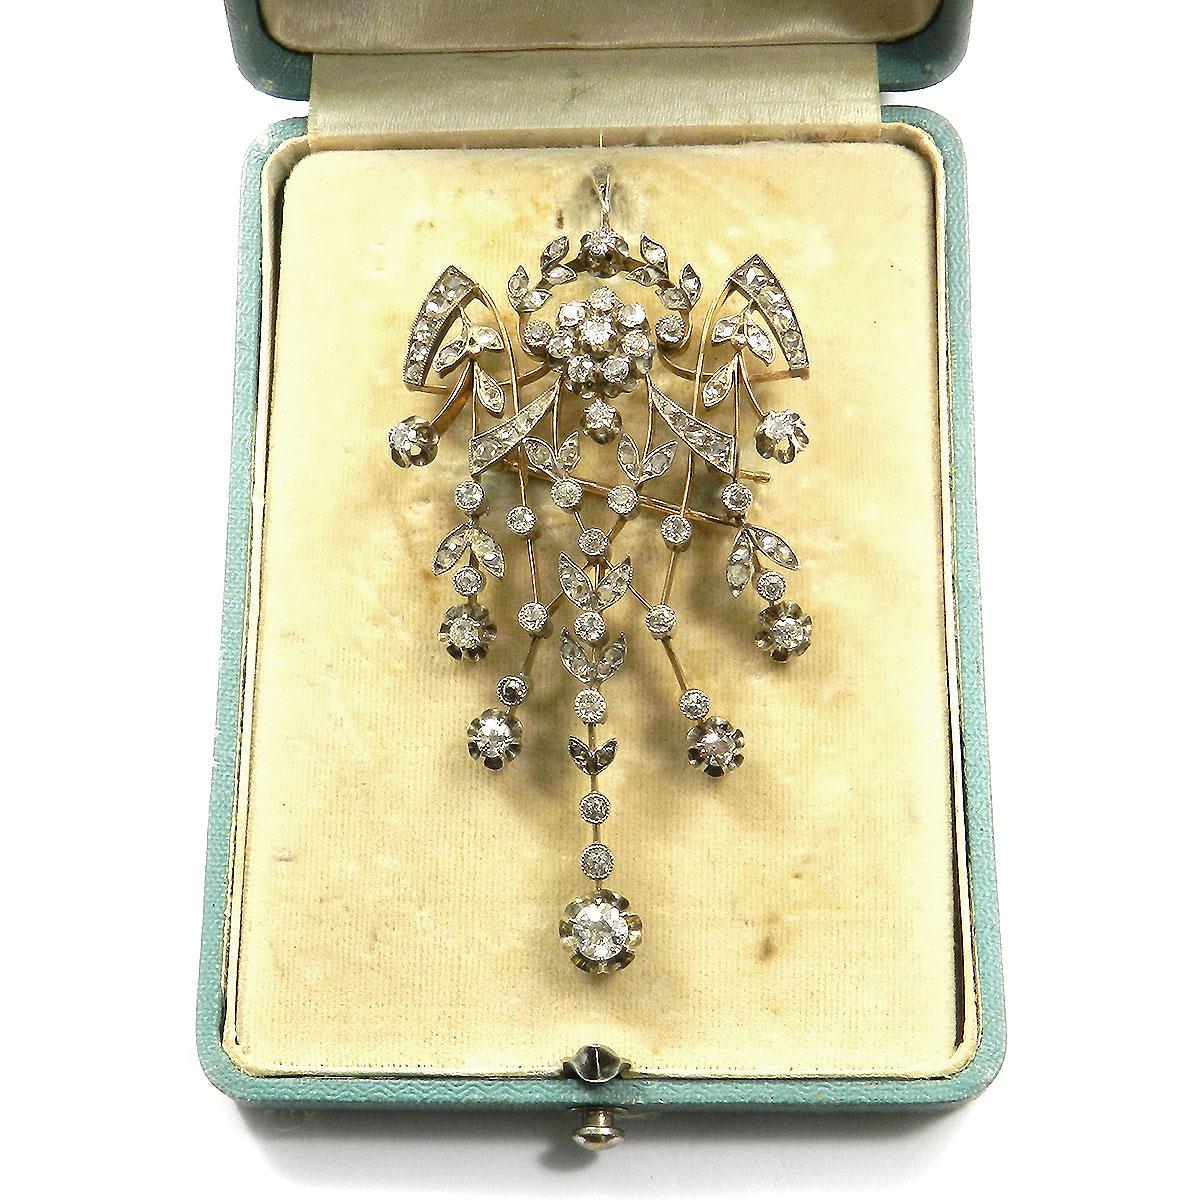 Antique 2.5 carat diamond Gold Pendant Brooch “Devant de Corsage” Moscow circa 1910

This decorative, openwork brooch can als o be worn as a pendant,  featuirng a central rosette, garland, leaf and ribbon motifs is completely set with 67 old